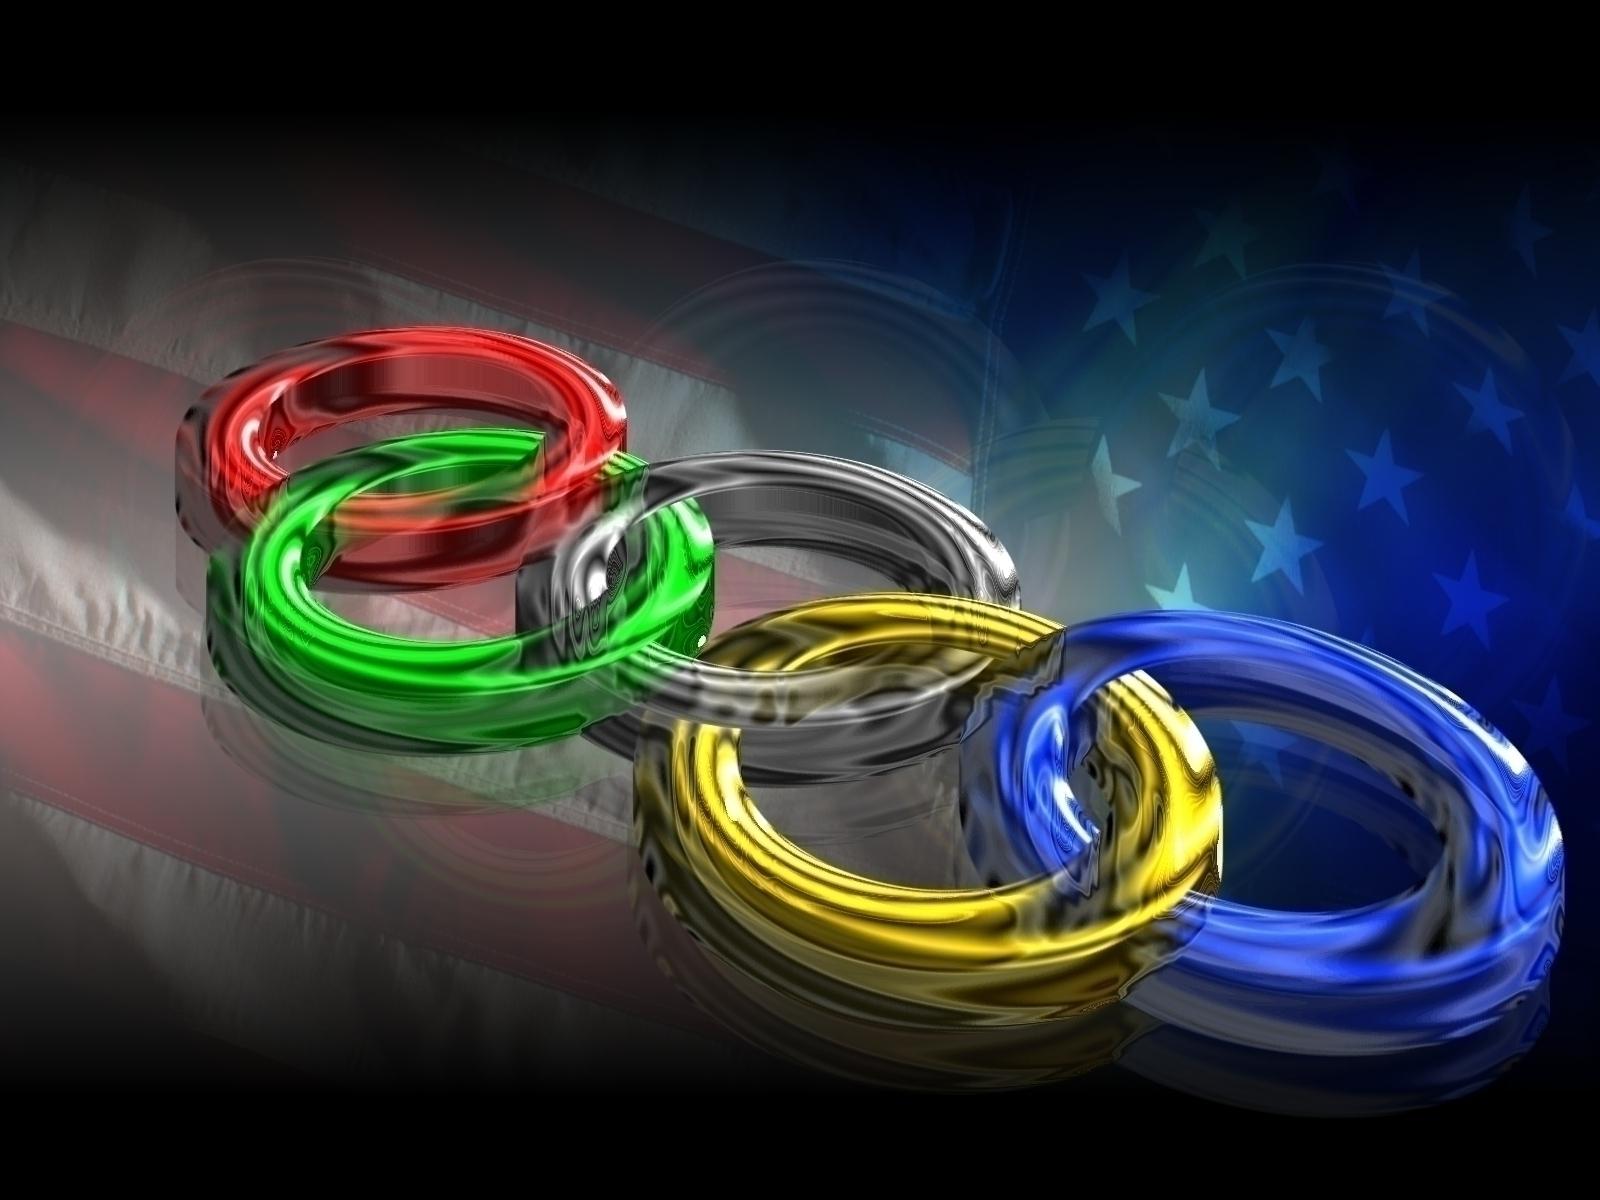 Group of Olympics Rings Usa Wallpaper